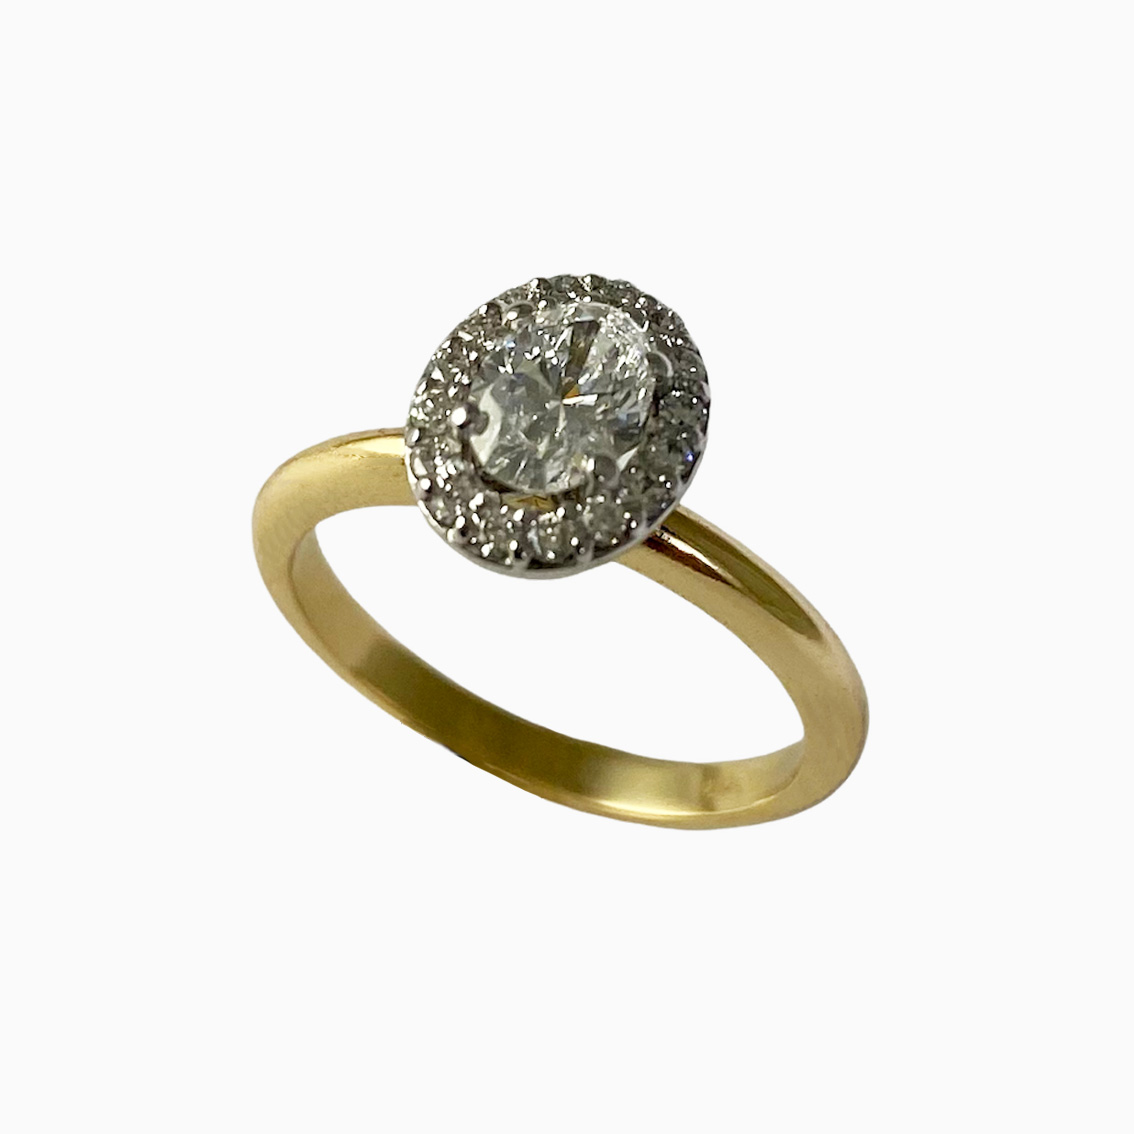 Diamond halo ring 18ct. White and yellow gold ring